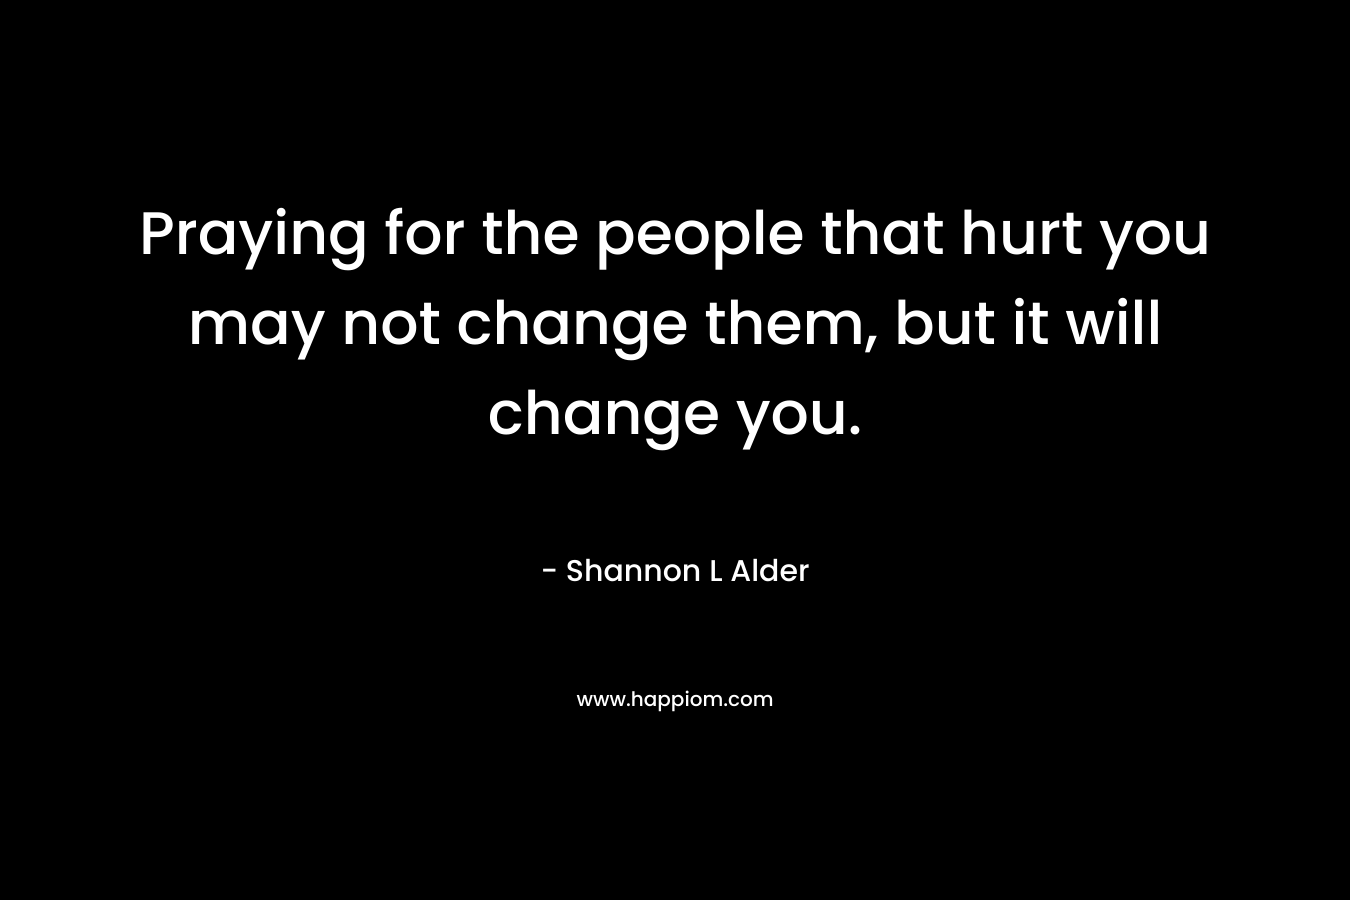 Praying for the people that hurt you may not change them, but it will change you.